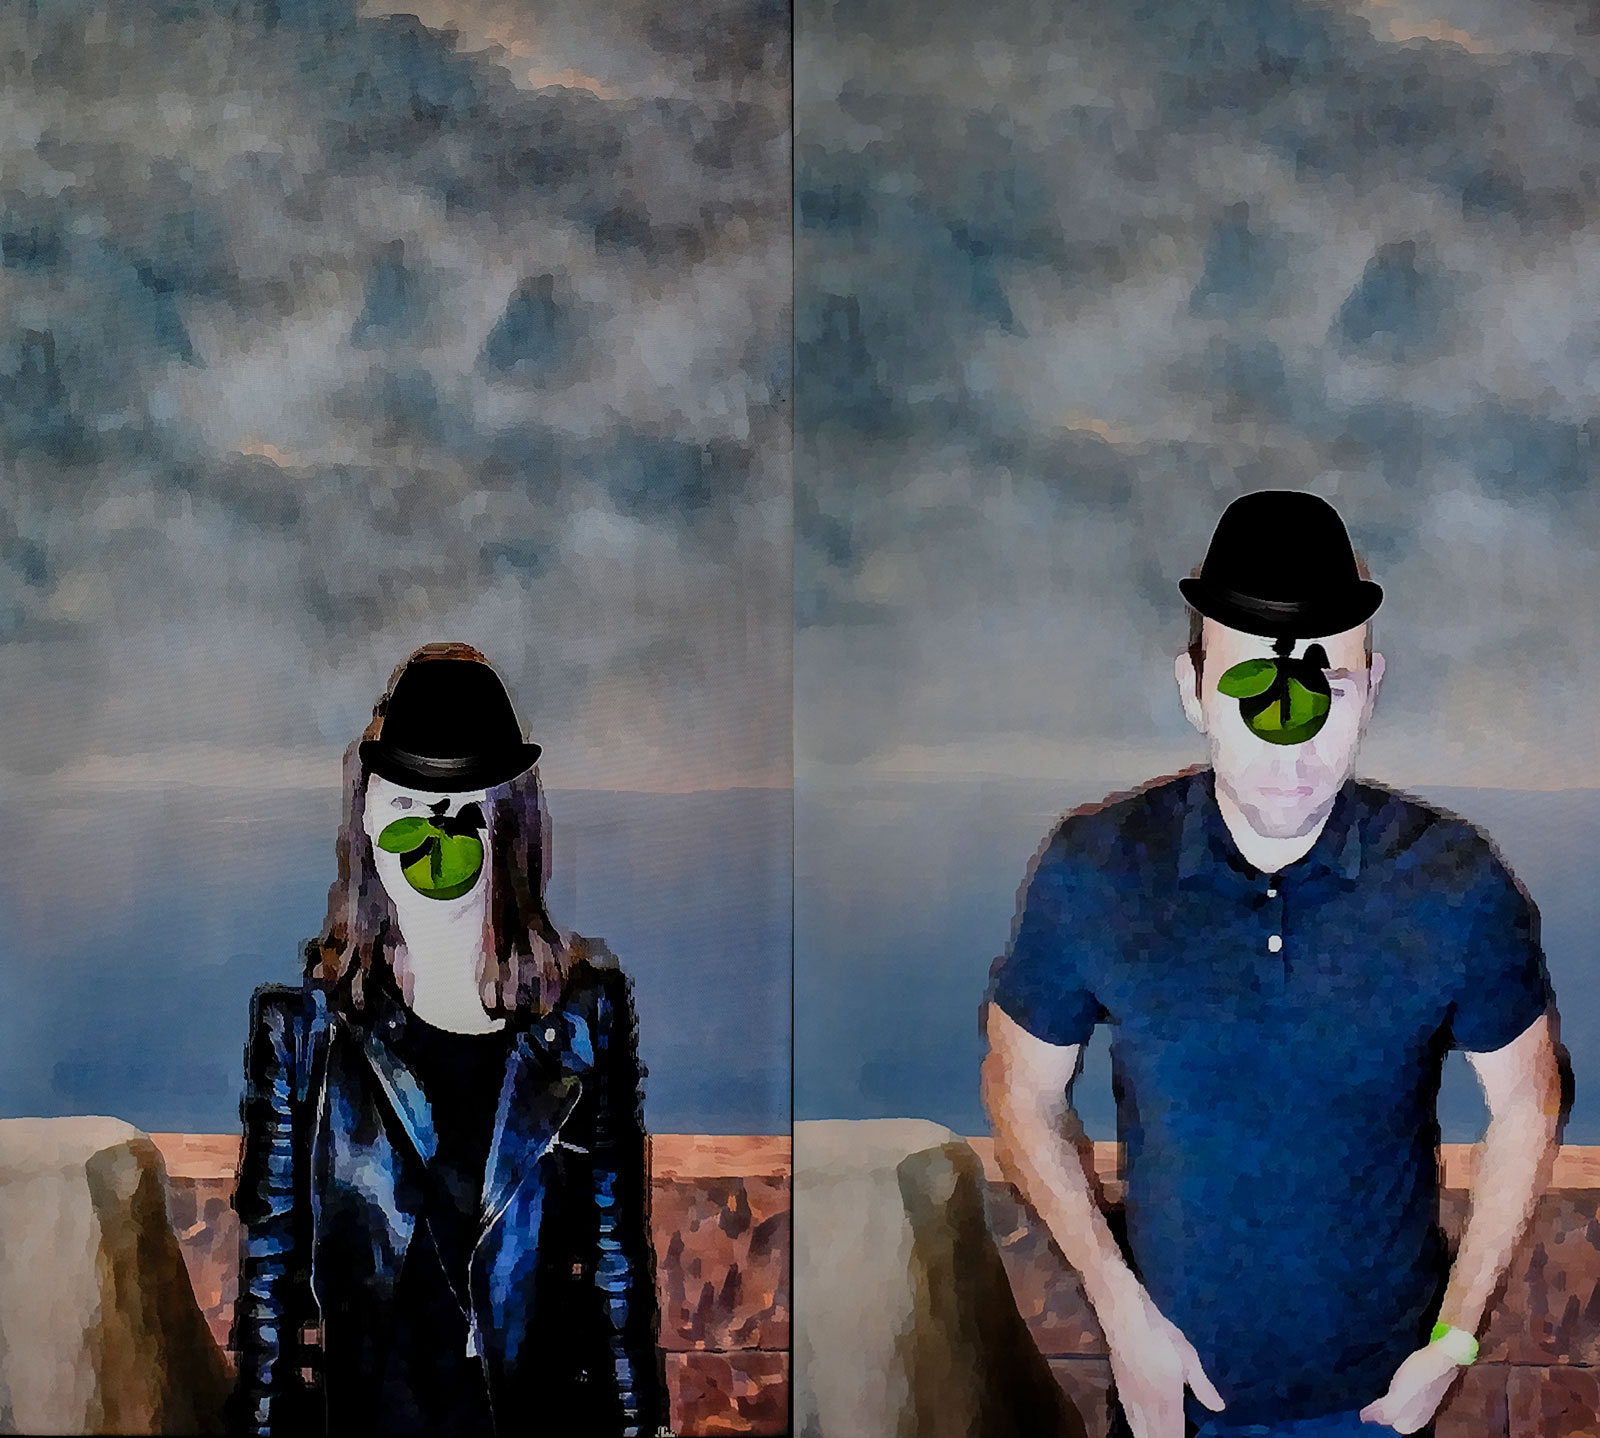 Alyssa and Michael participate in an interactive exhibit at the Dali Museum